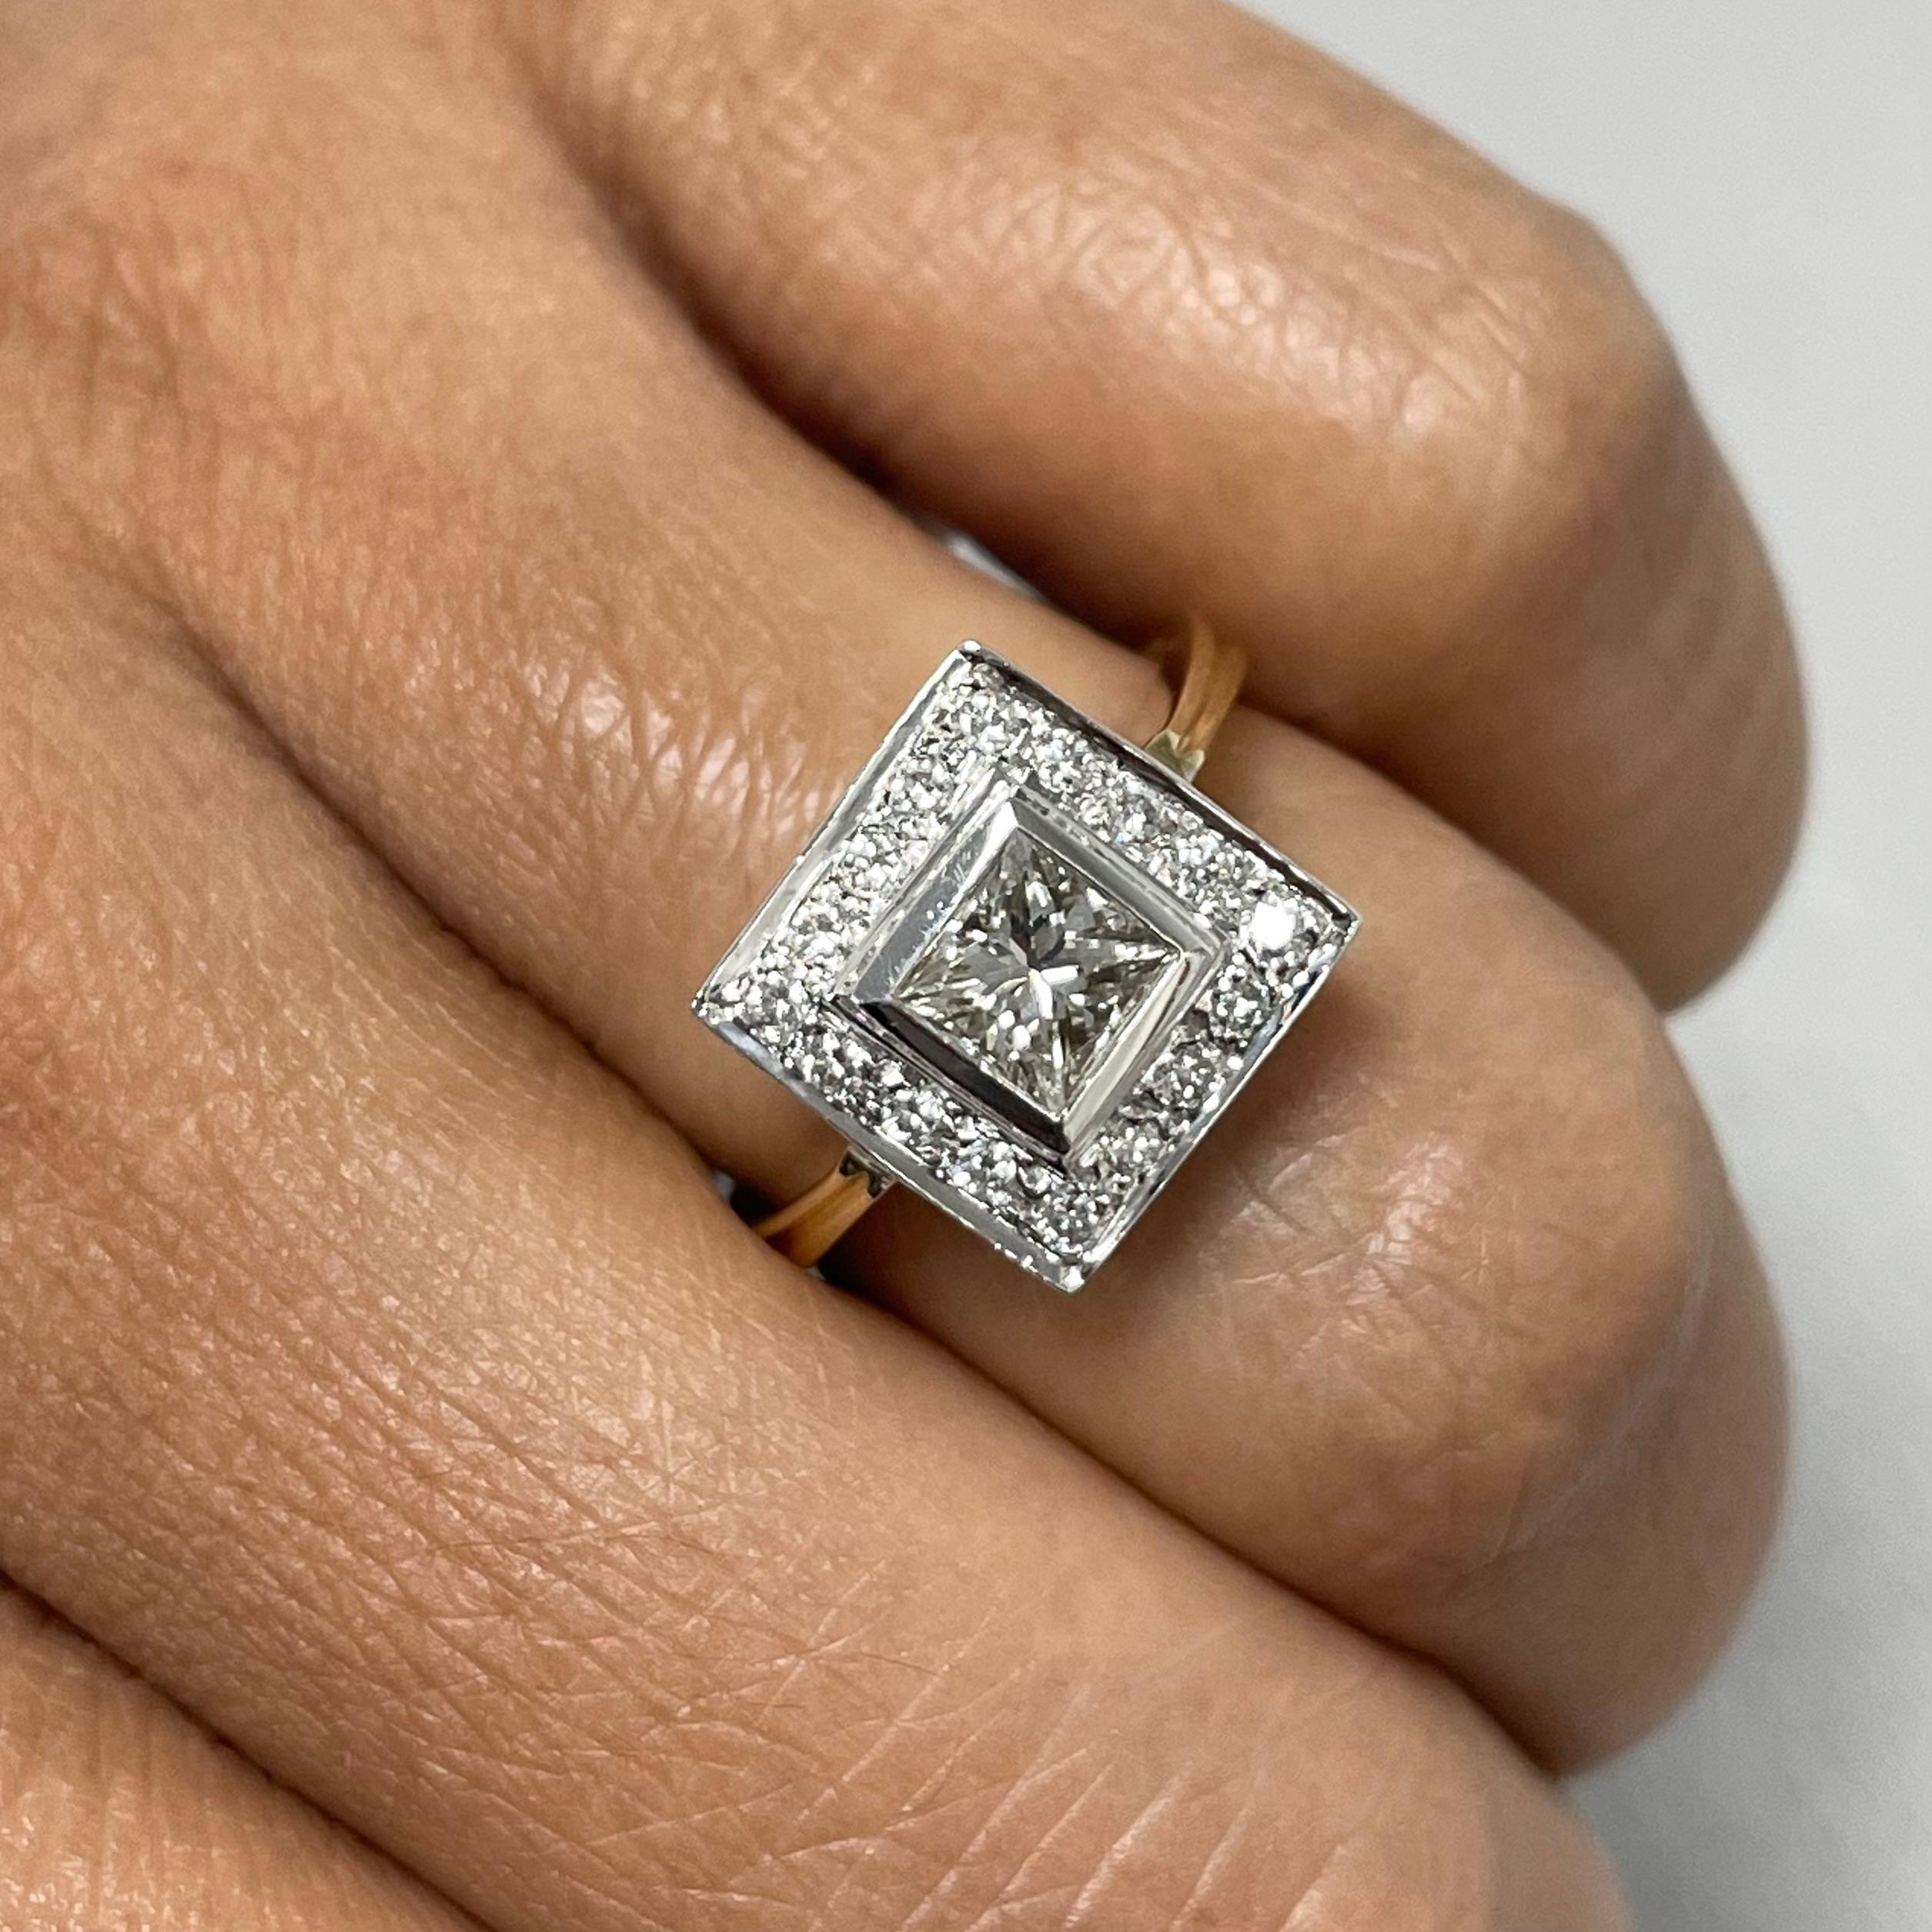 The Gatbsy Engagement Ring is bold and chic. With its strong geometric lines and unique shape it stands out leaving the onlooker perplexed and dazzled. 

Center Diamond Shape: Princess Cut
Center Diamond Weight: 0.70 ct 
Diamond Color: K
Diamond